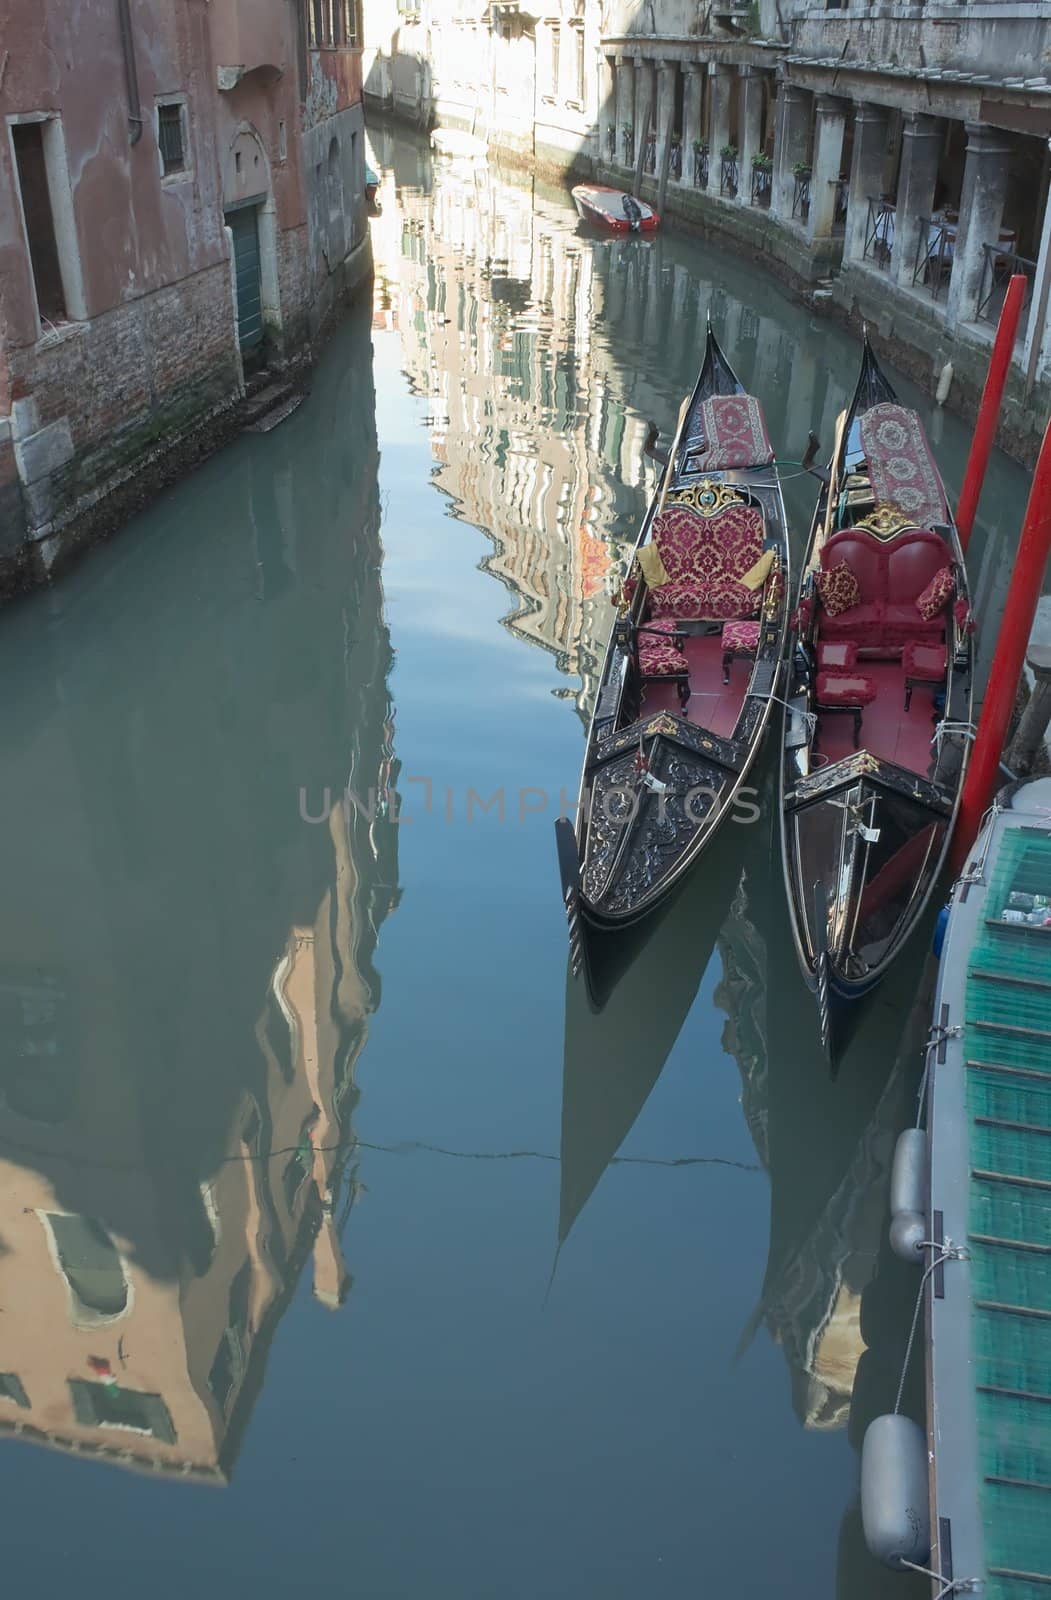 View of Venice. Reflections in the canal and two gondolas.